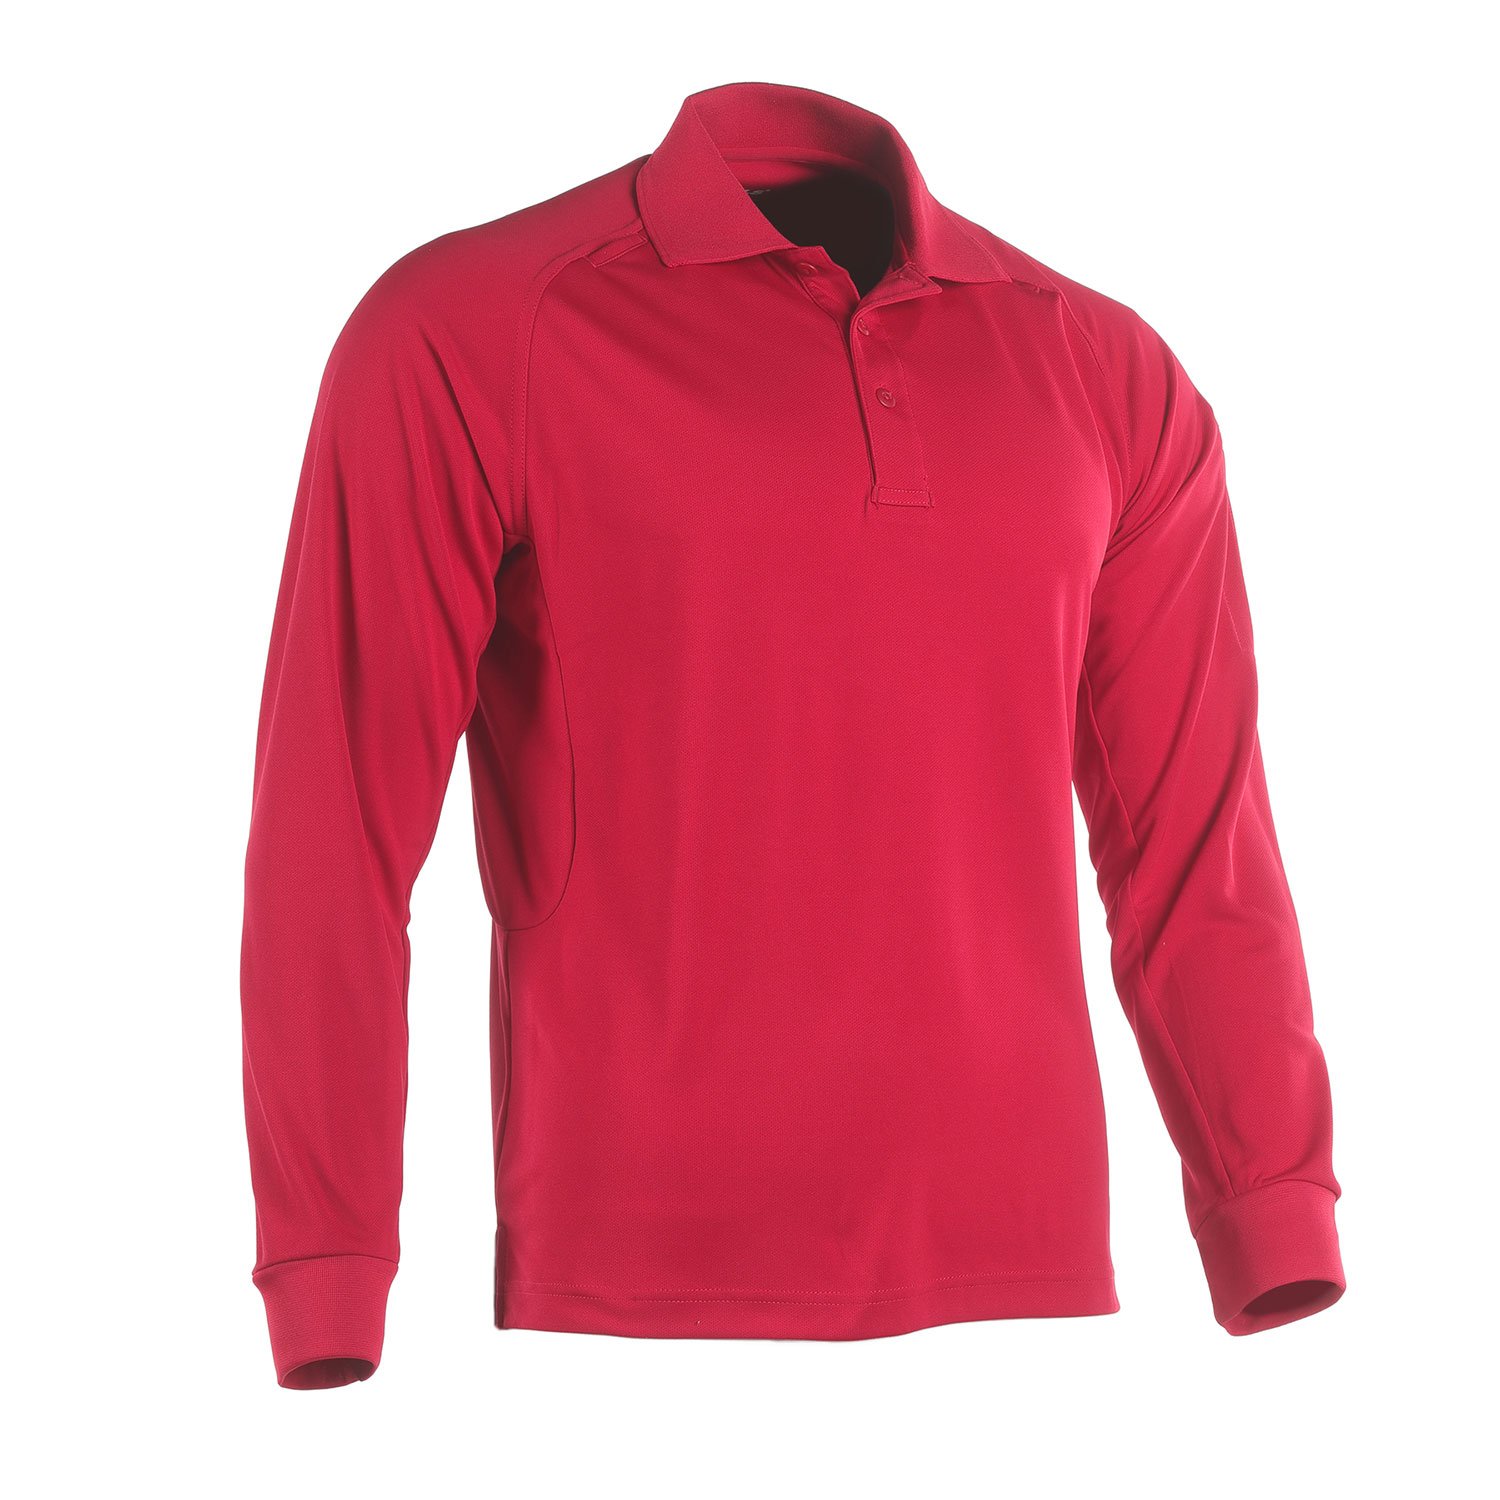 Galls Tac Force Lightweight Long Sleeve Polo